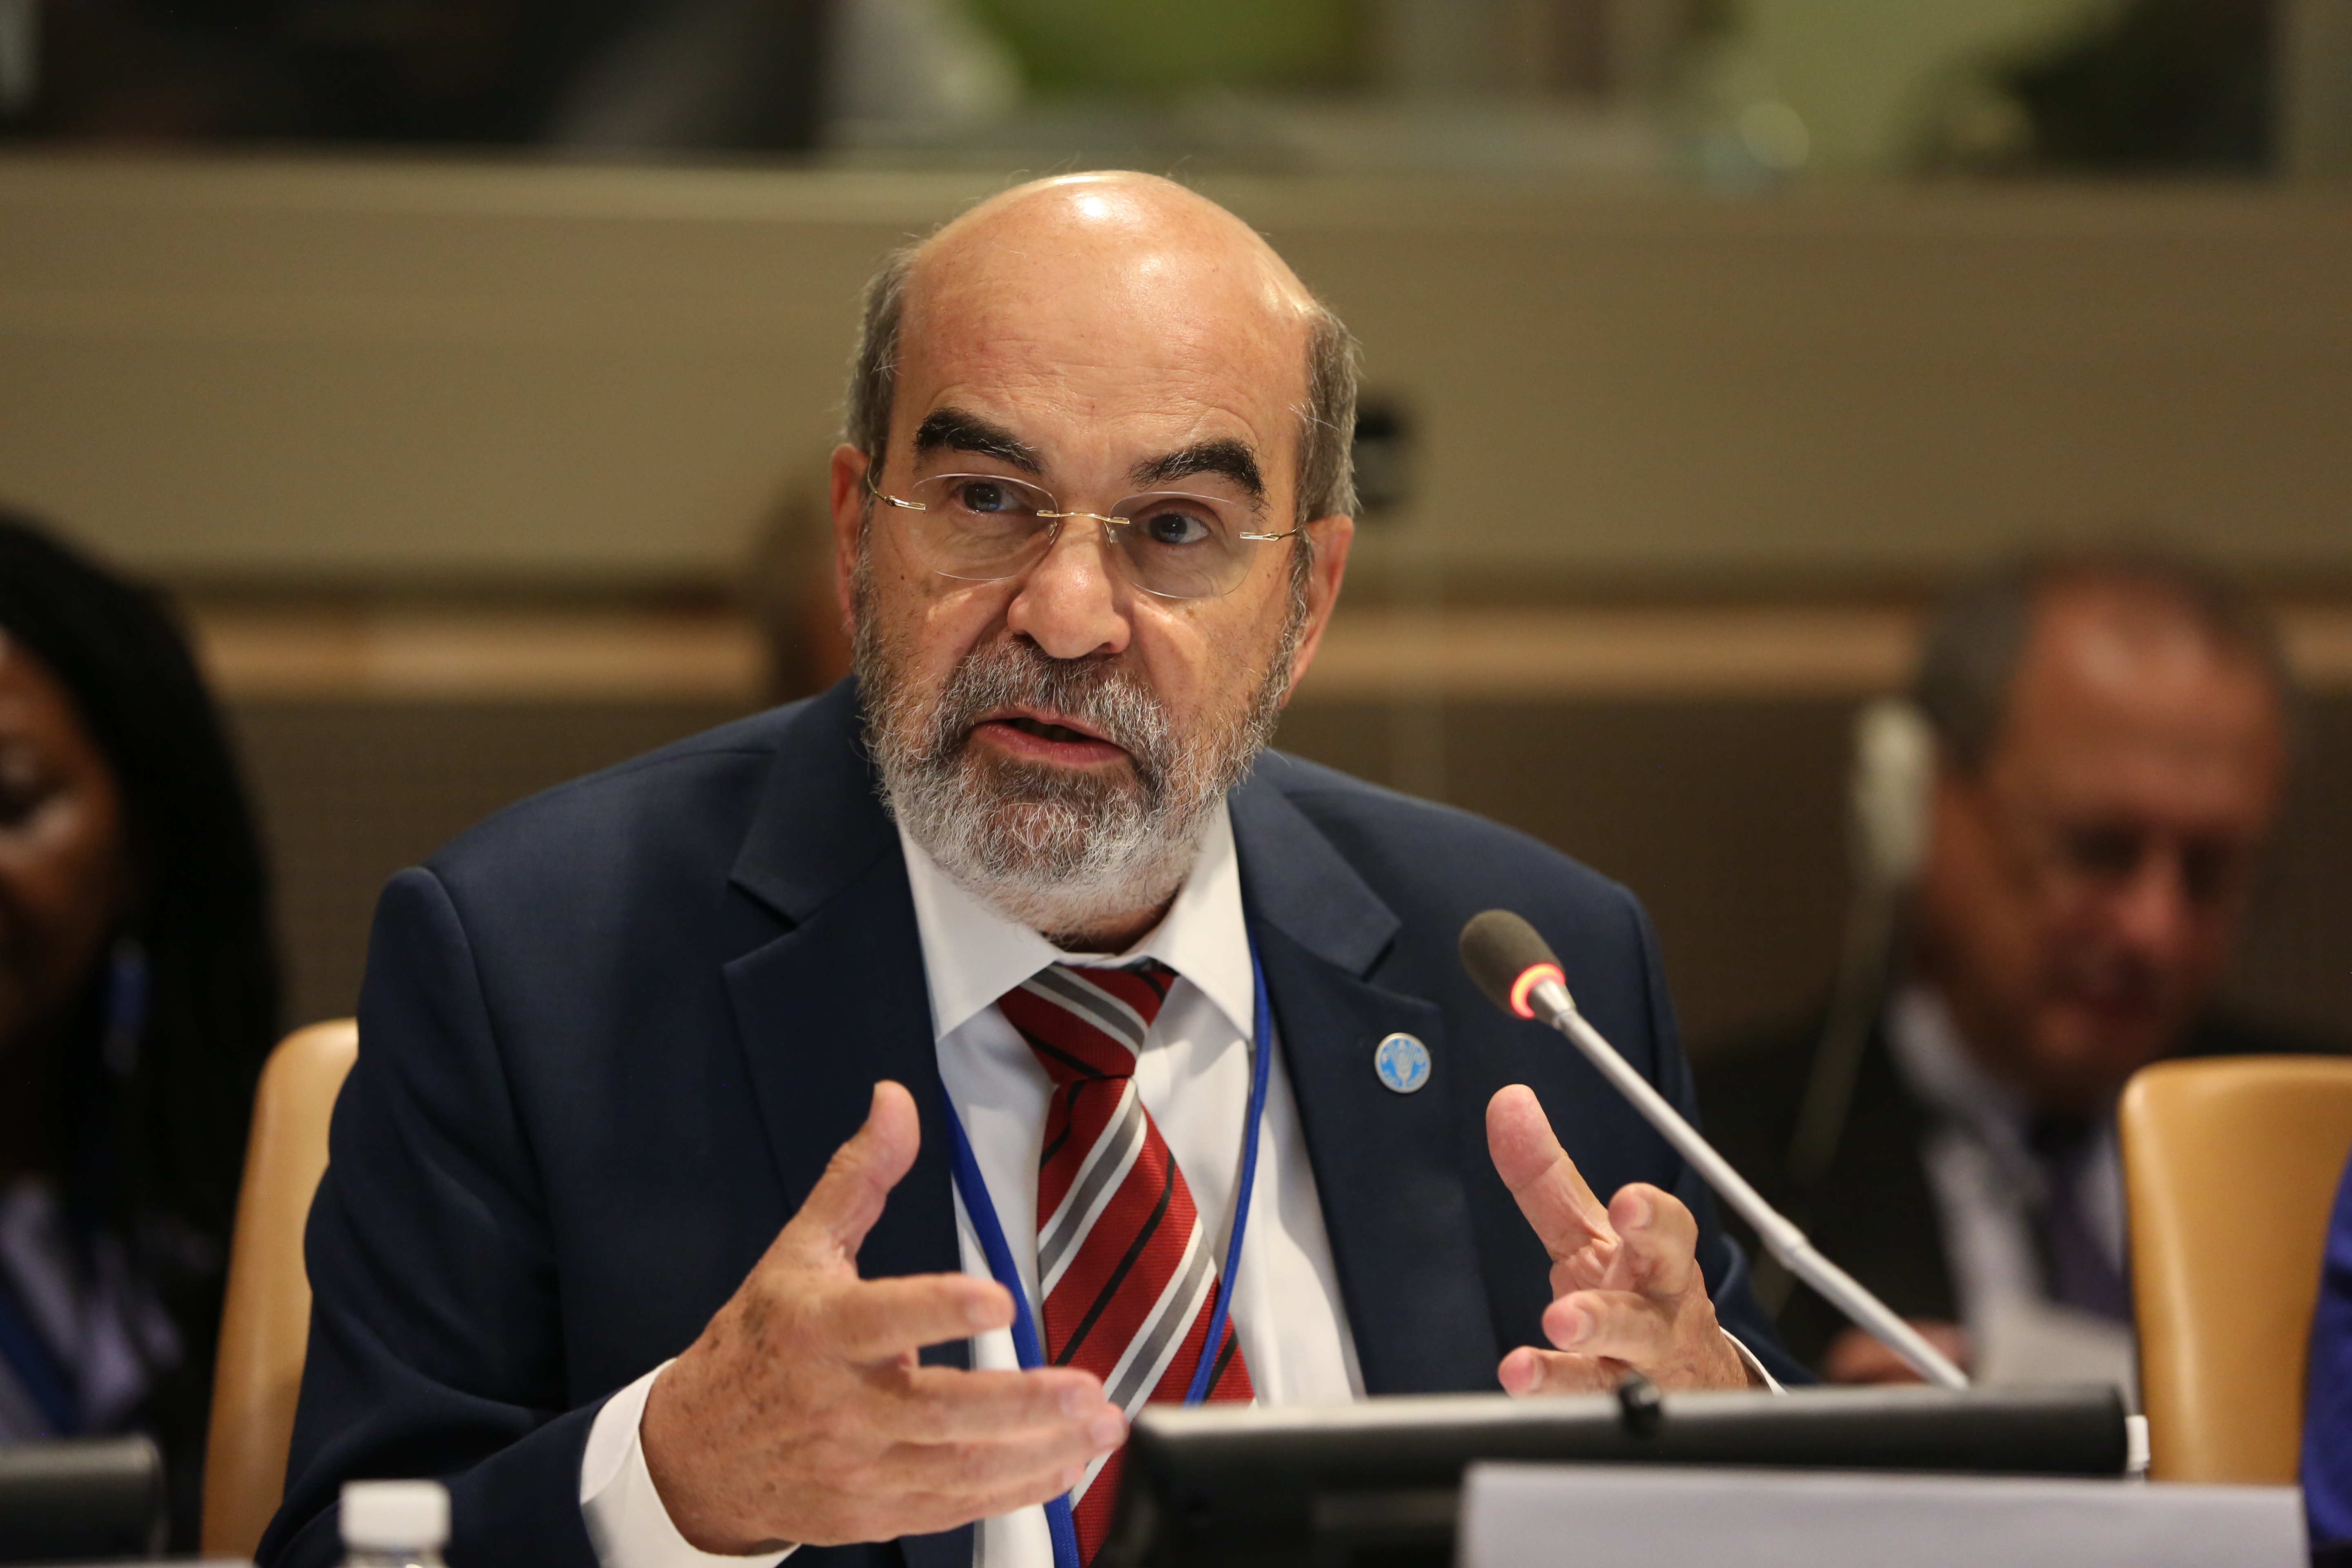 Portrait picture of Prof Graziano da Silva talking. He wears a suit with an FAO badge on the lapel.